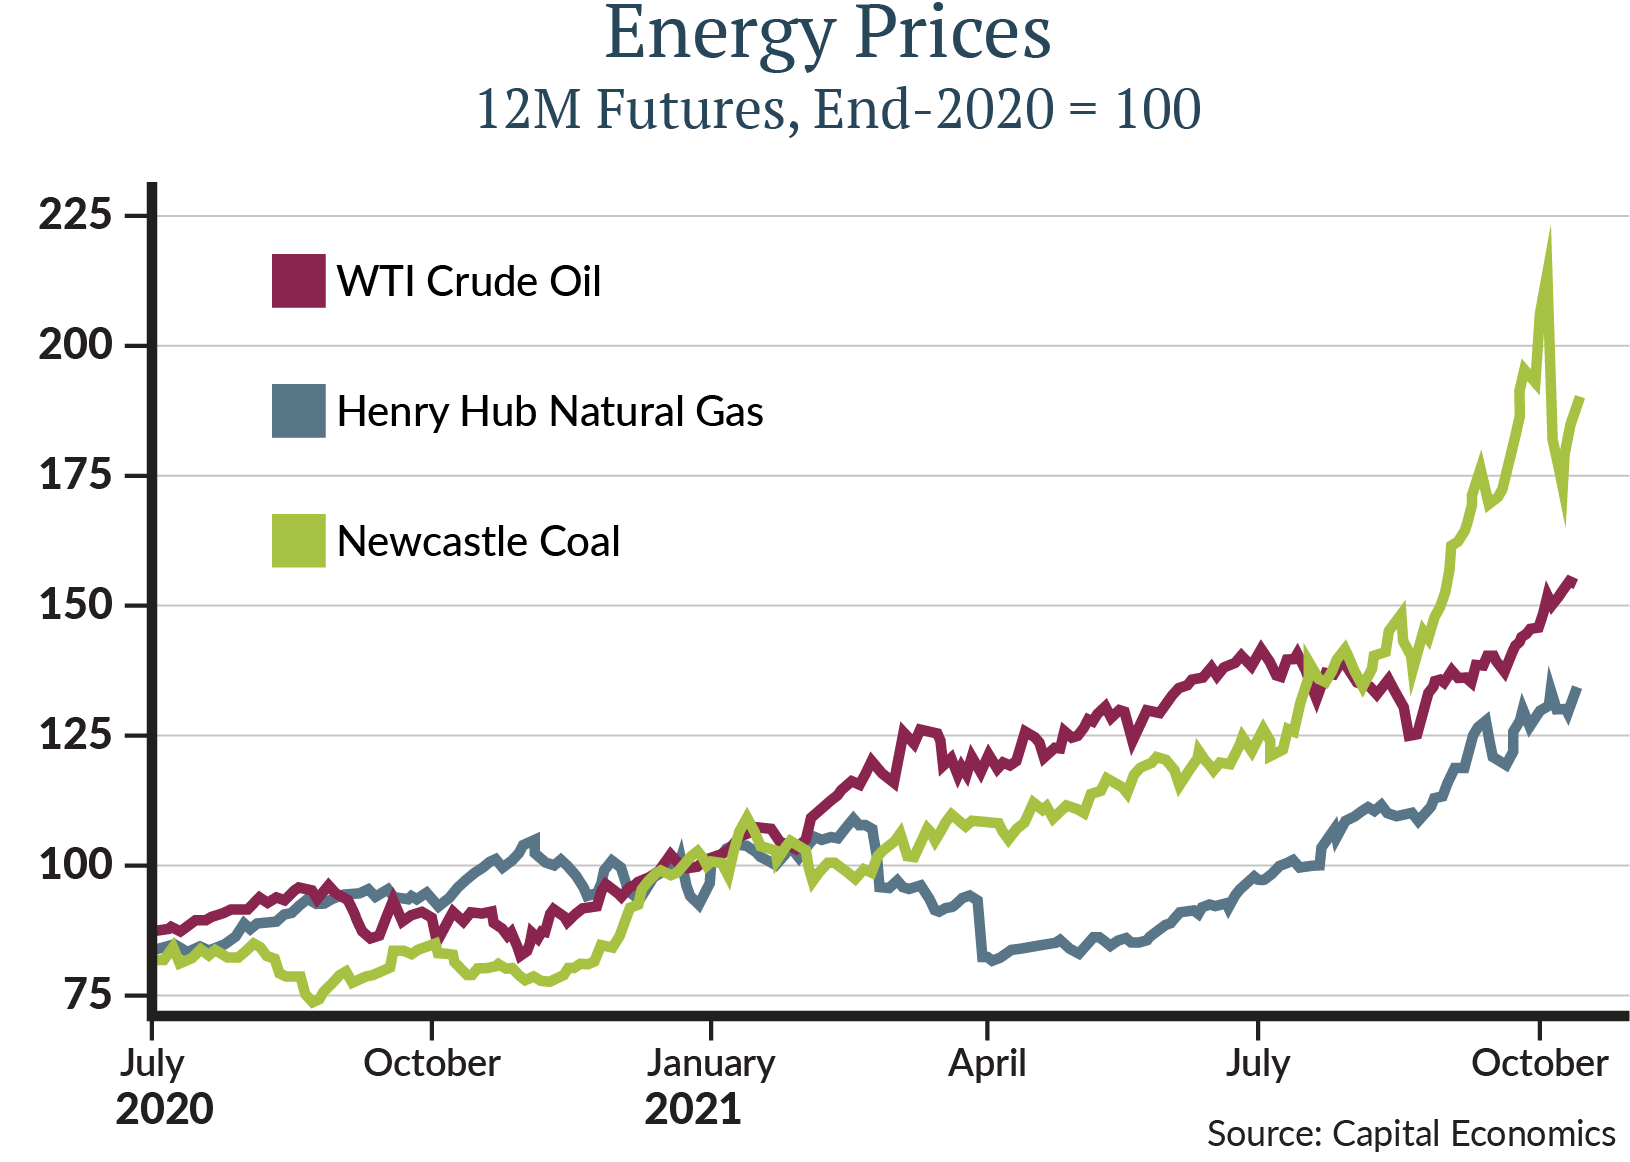 energy pricing shocks will have an effect on consumer purchasing power and consumer confidence, as well especially with lower income earners.